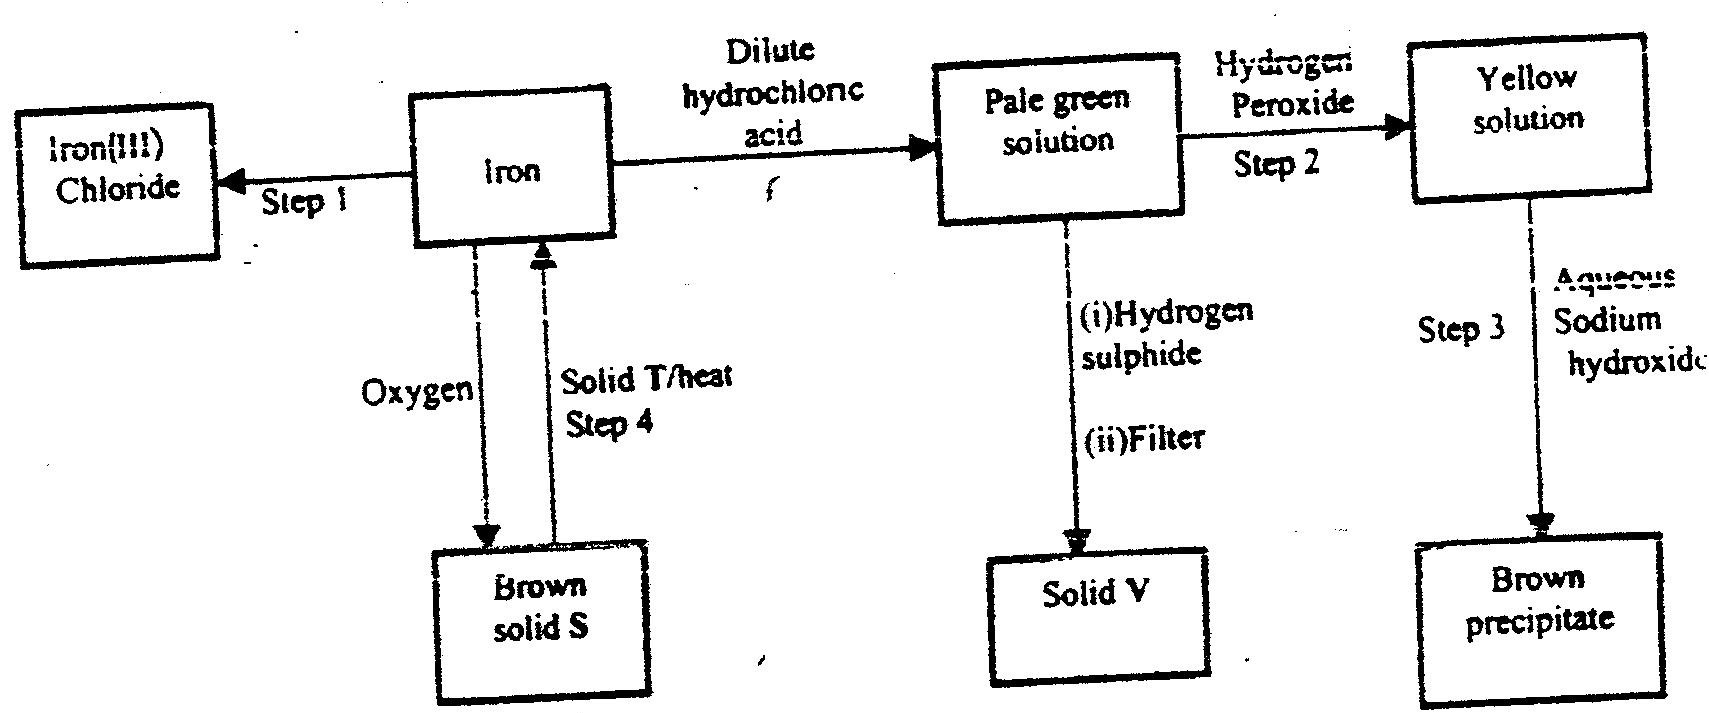 The flow chart below shows a sequence of reactions starting with